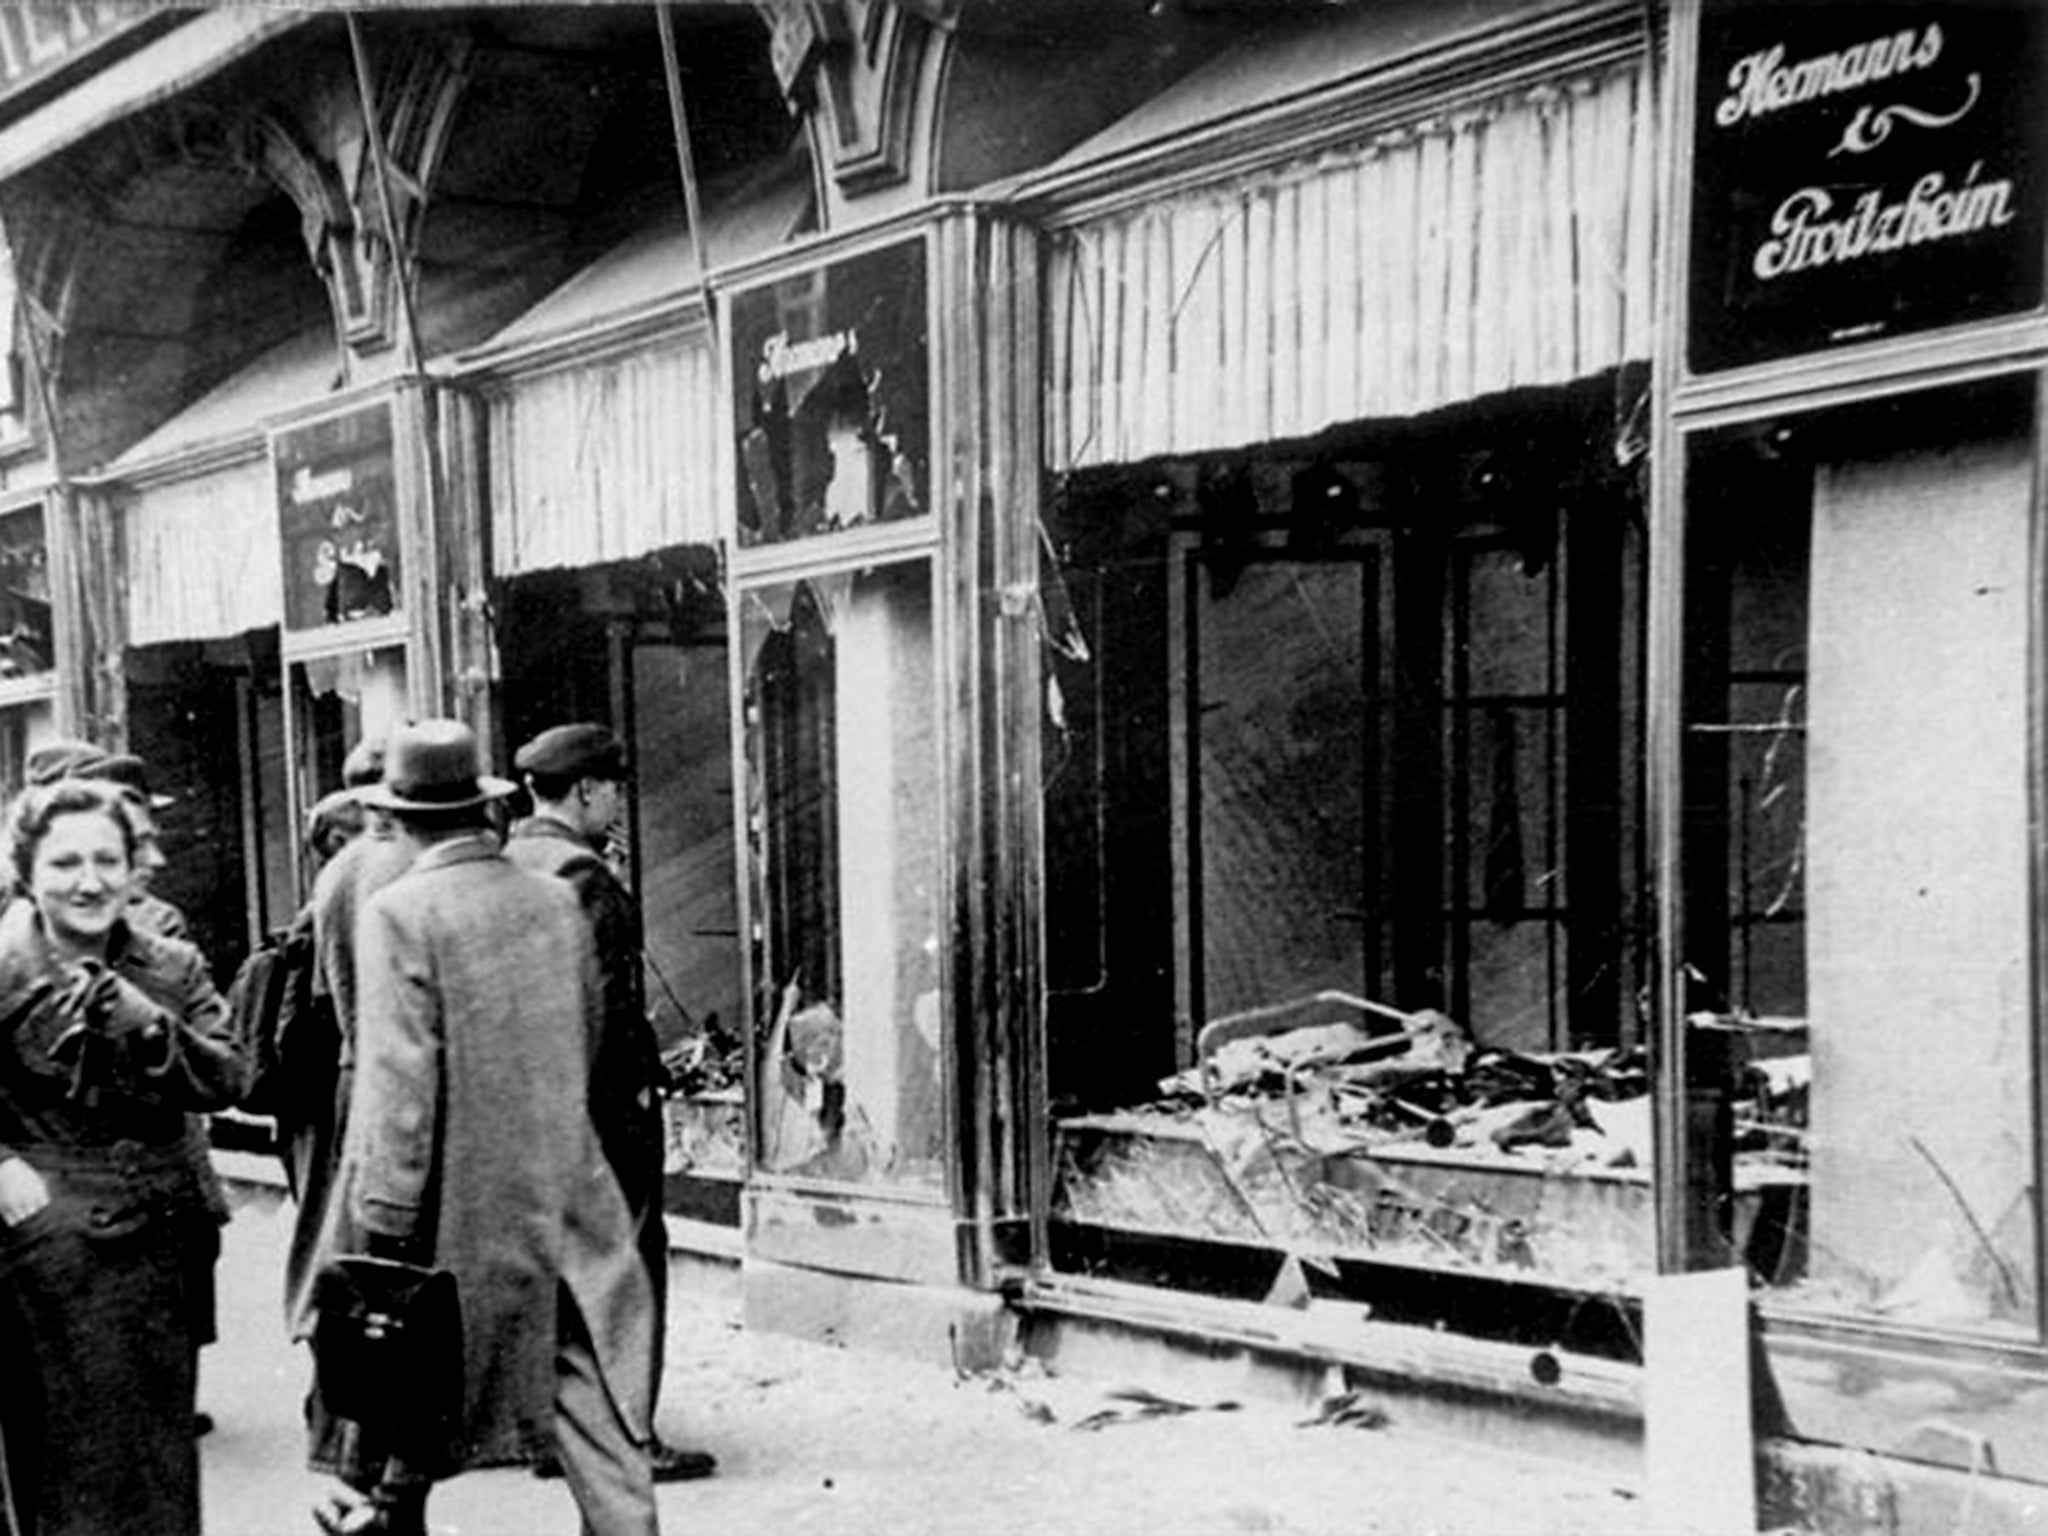 Kristallnacht saw attacks on more than 7,000 Jewish shops and businesses